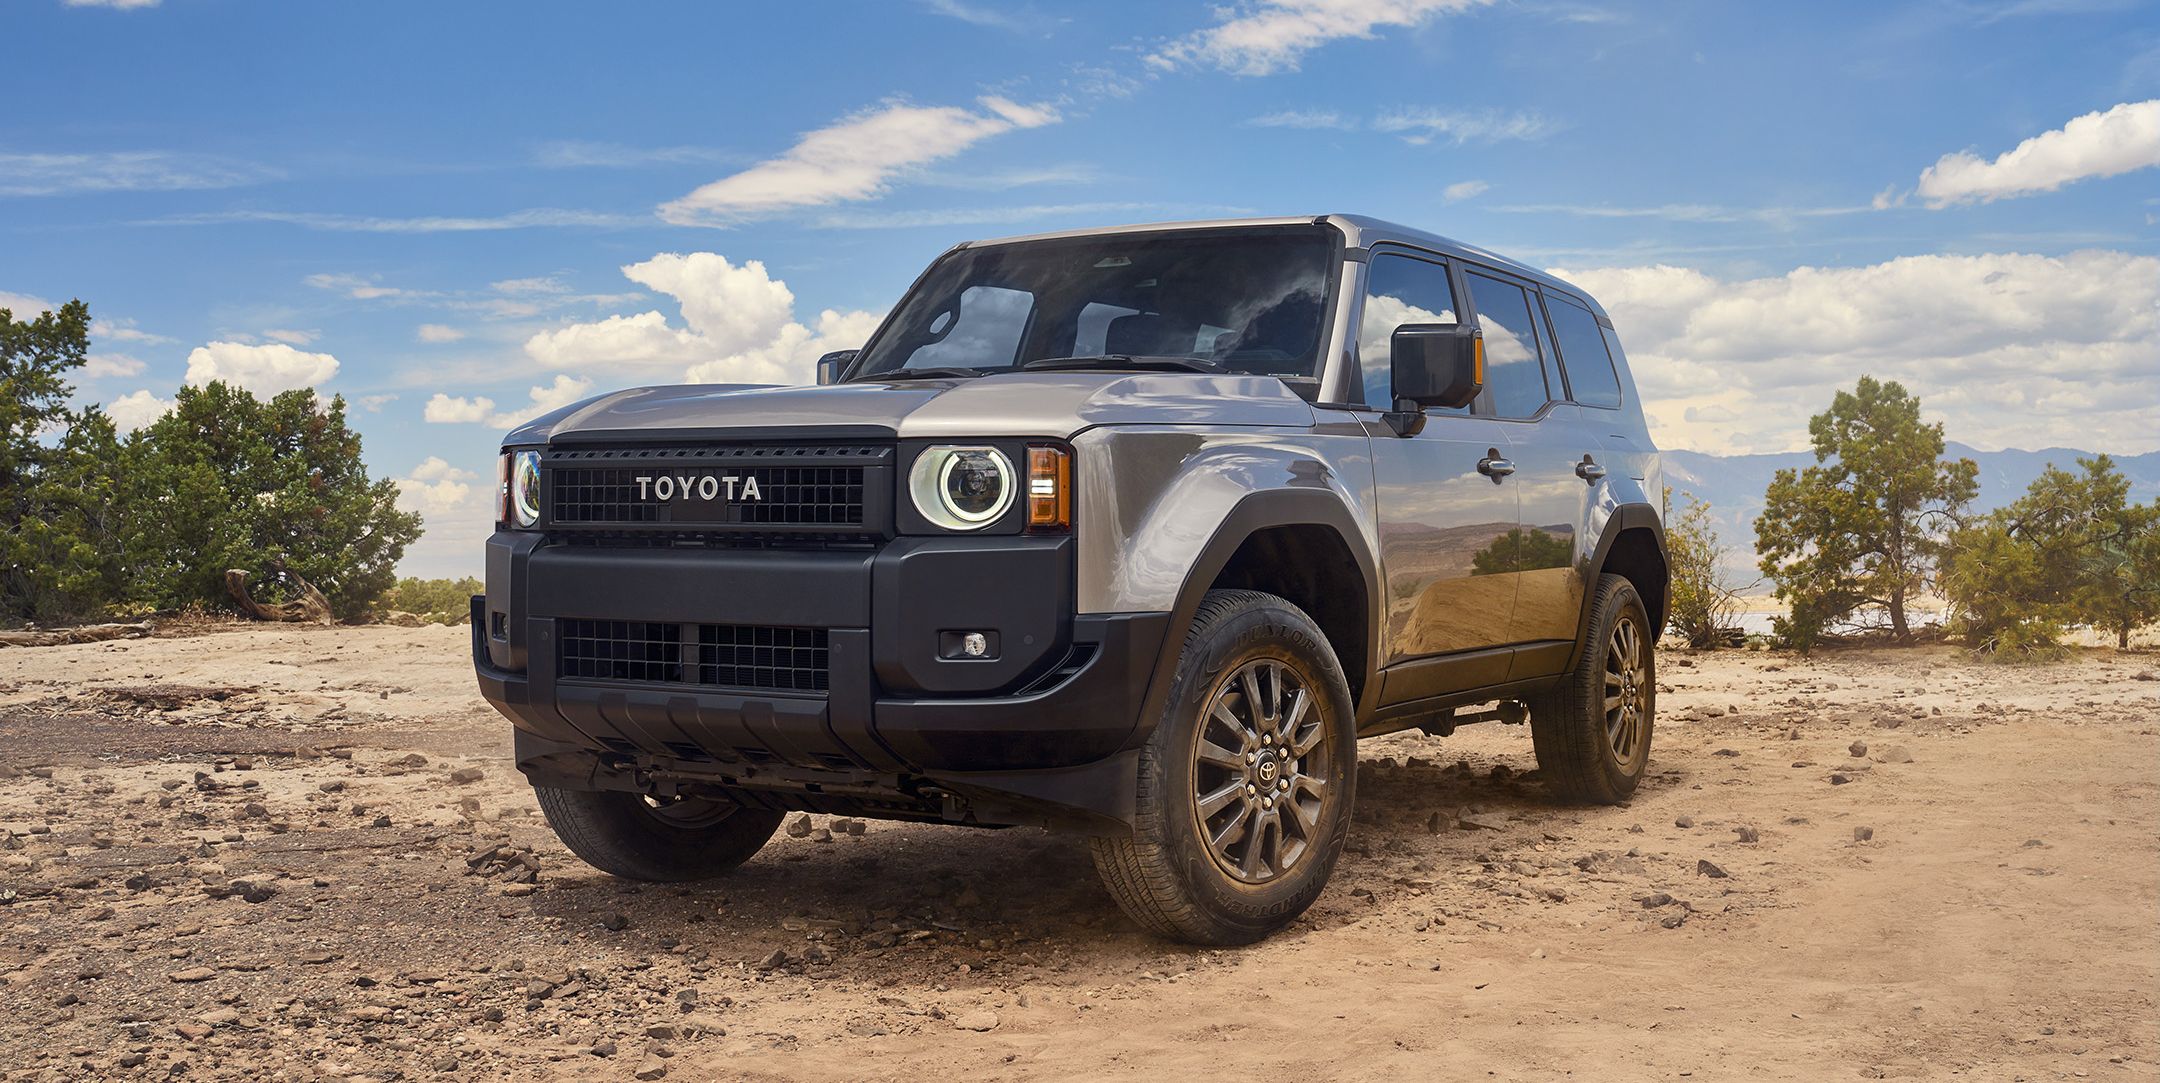 The Toyota Land Cruiser Is No Longer a Luxury Truck